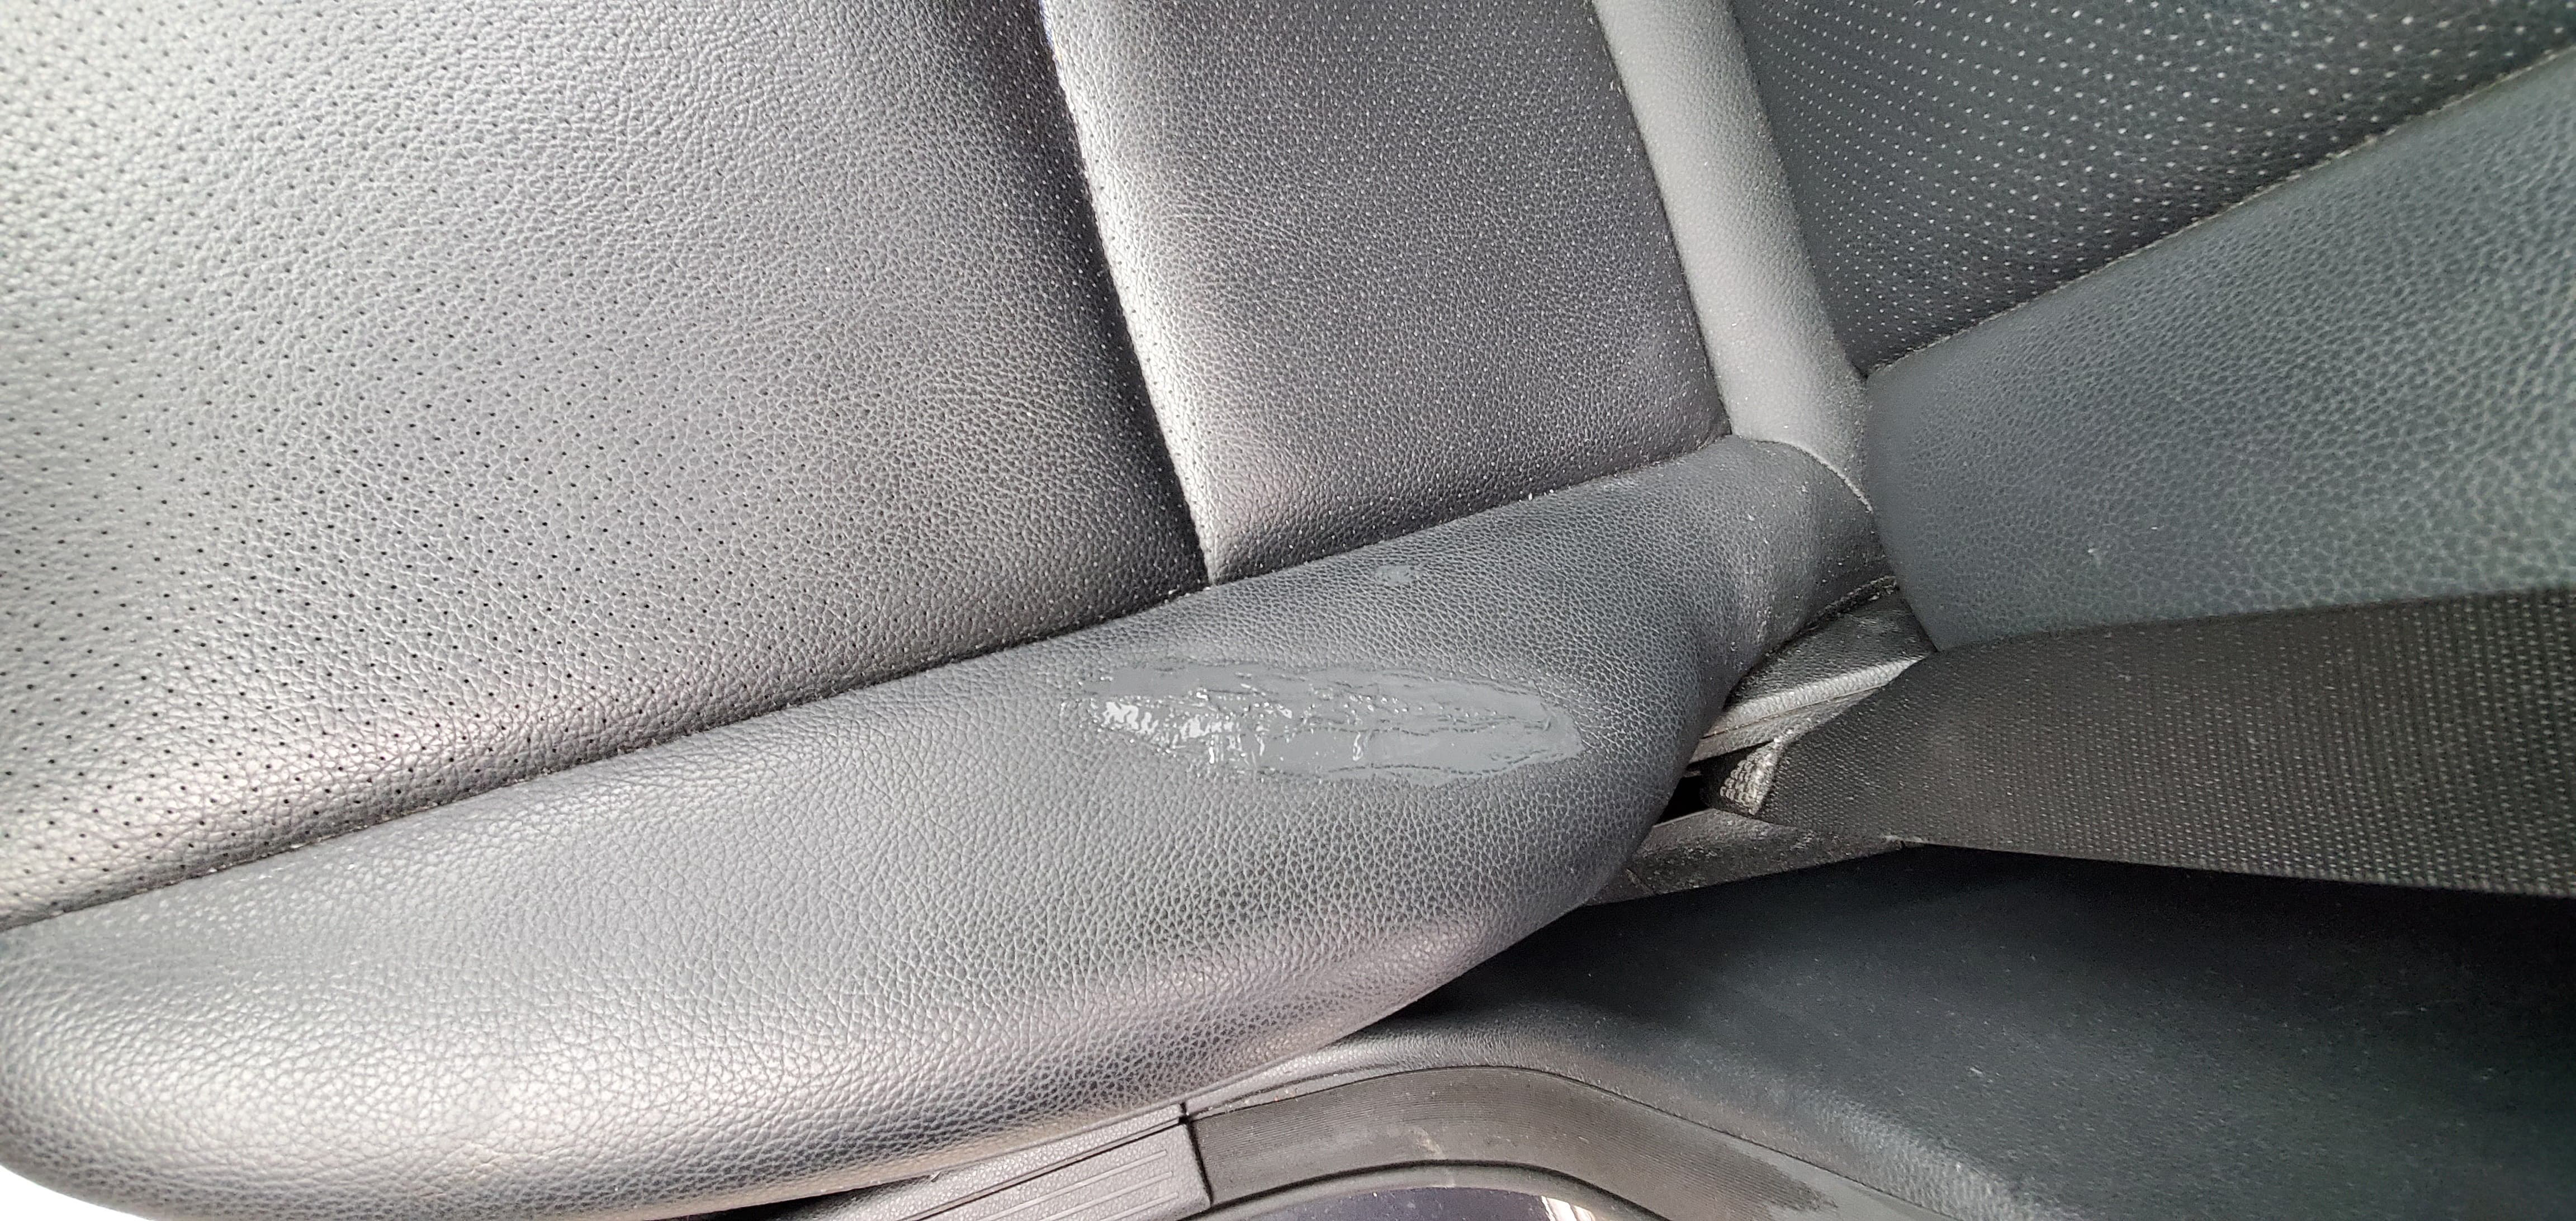 How To Repair A Leather Car Seat - How To Repair Small Cut In Leather Seat